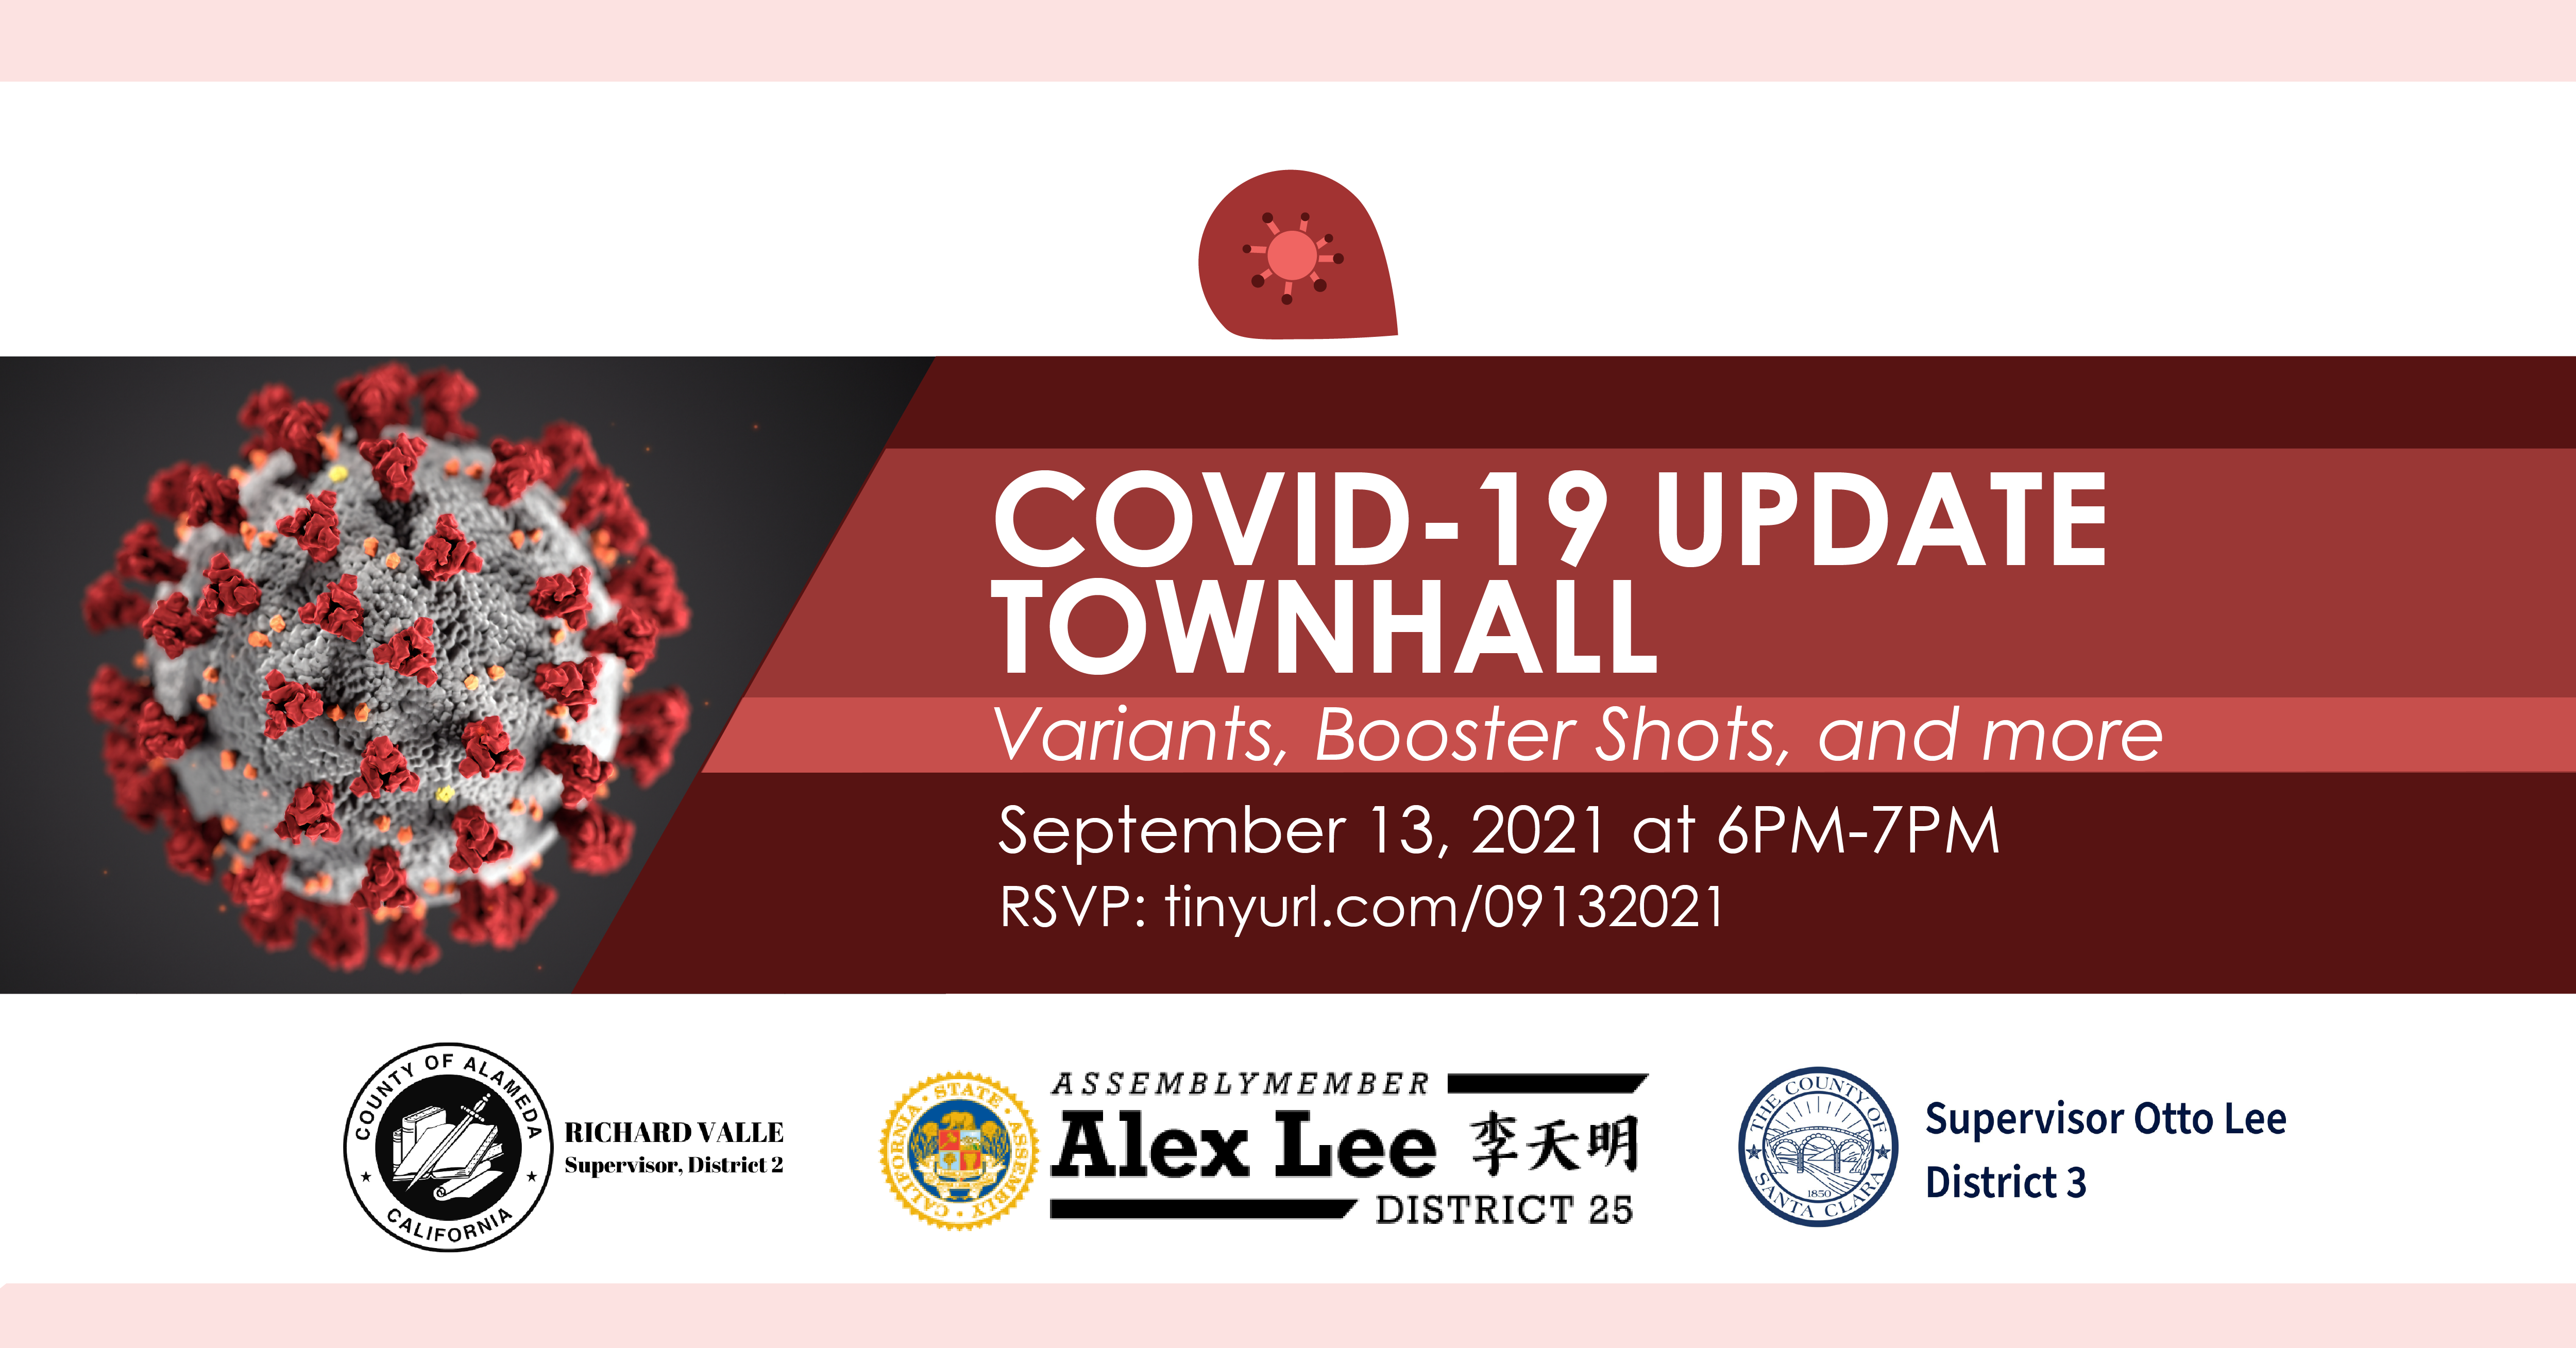 COVID-19 Update Townhall